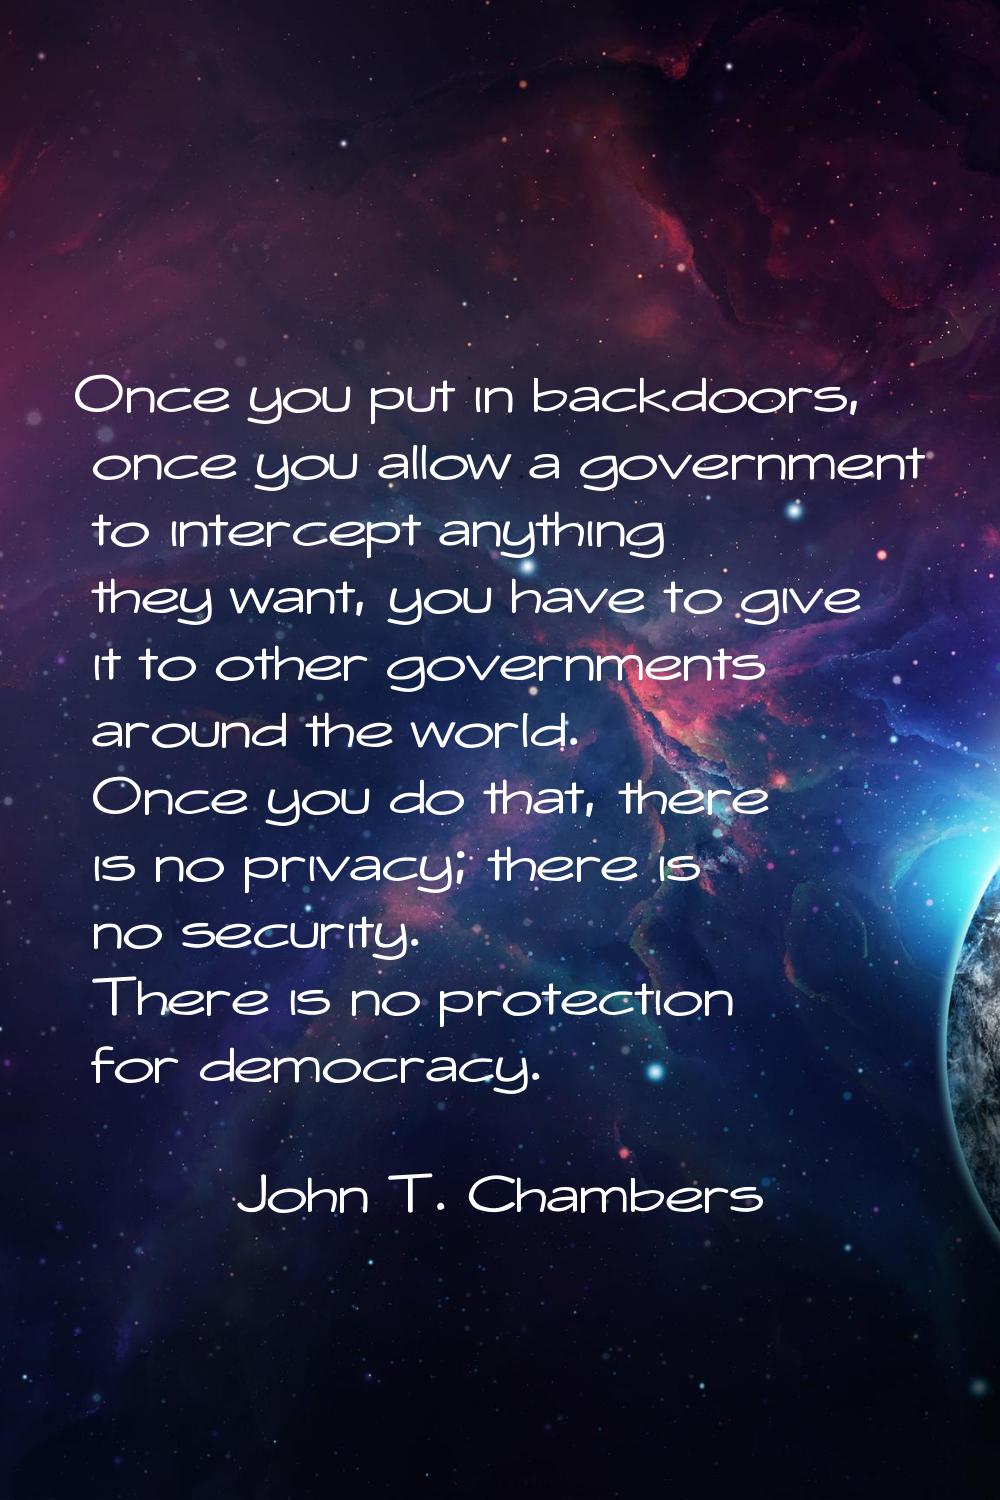 Once you put in backdoors, once you allow a government to intercept anything they want, you have to